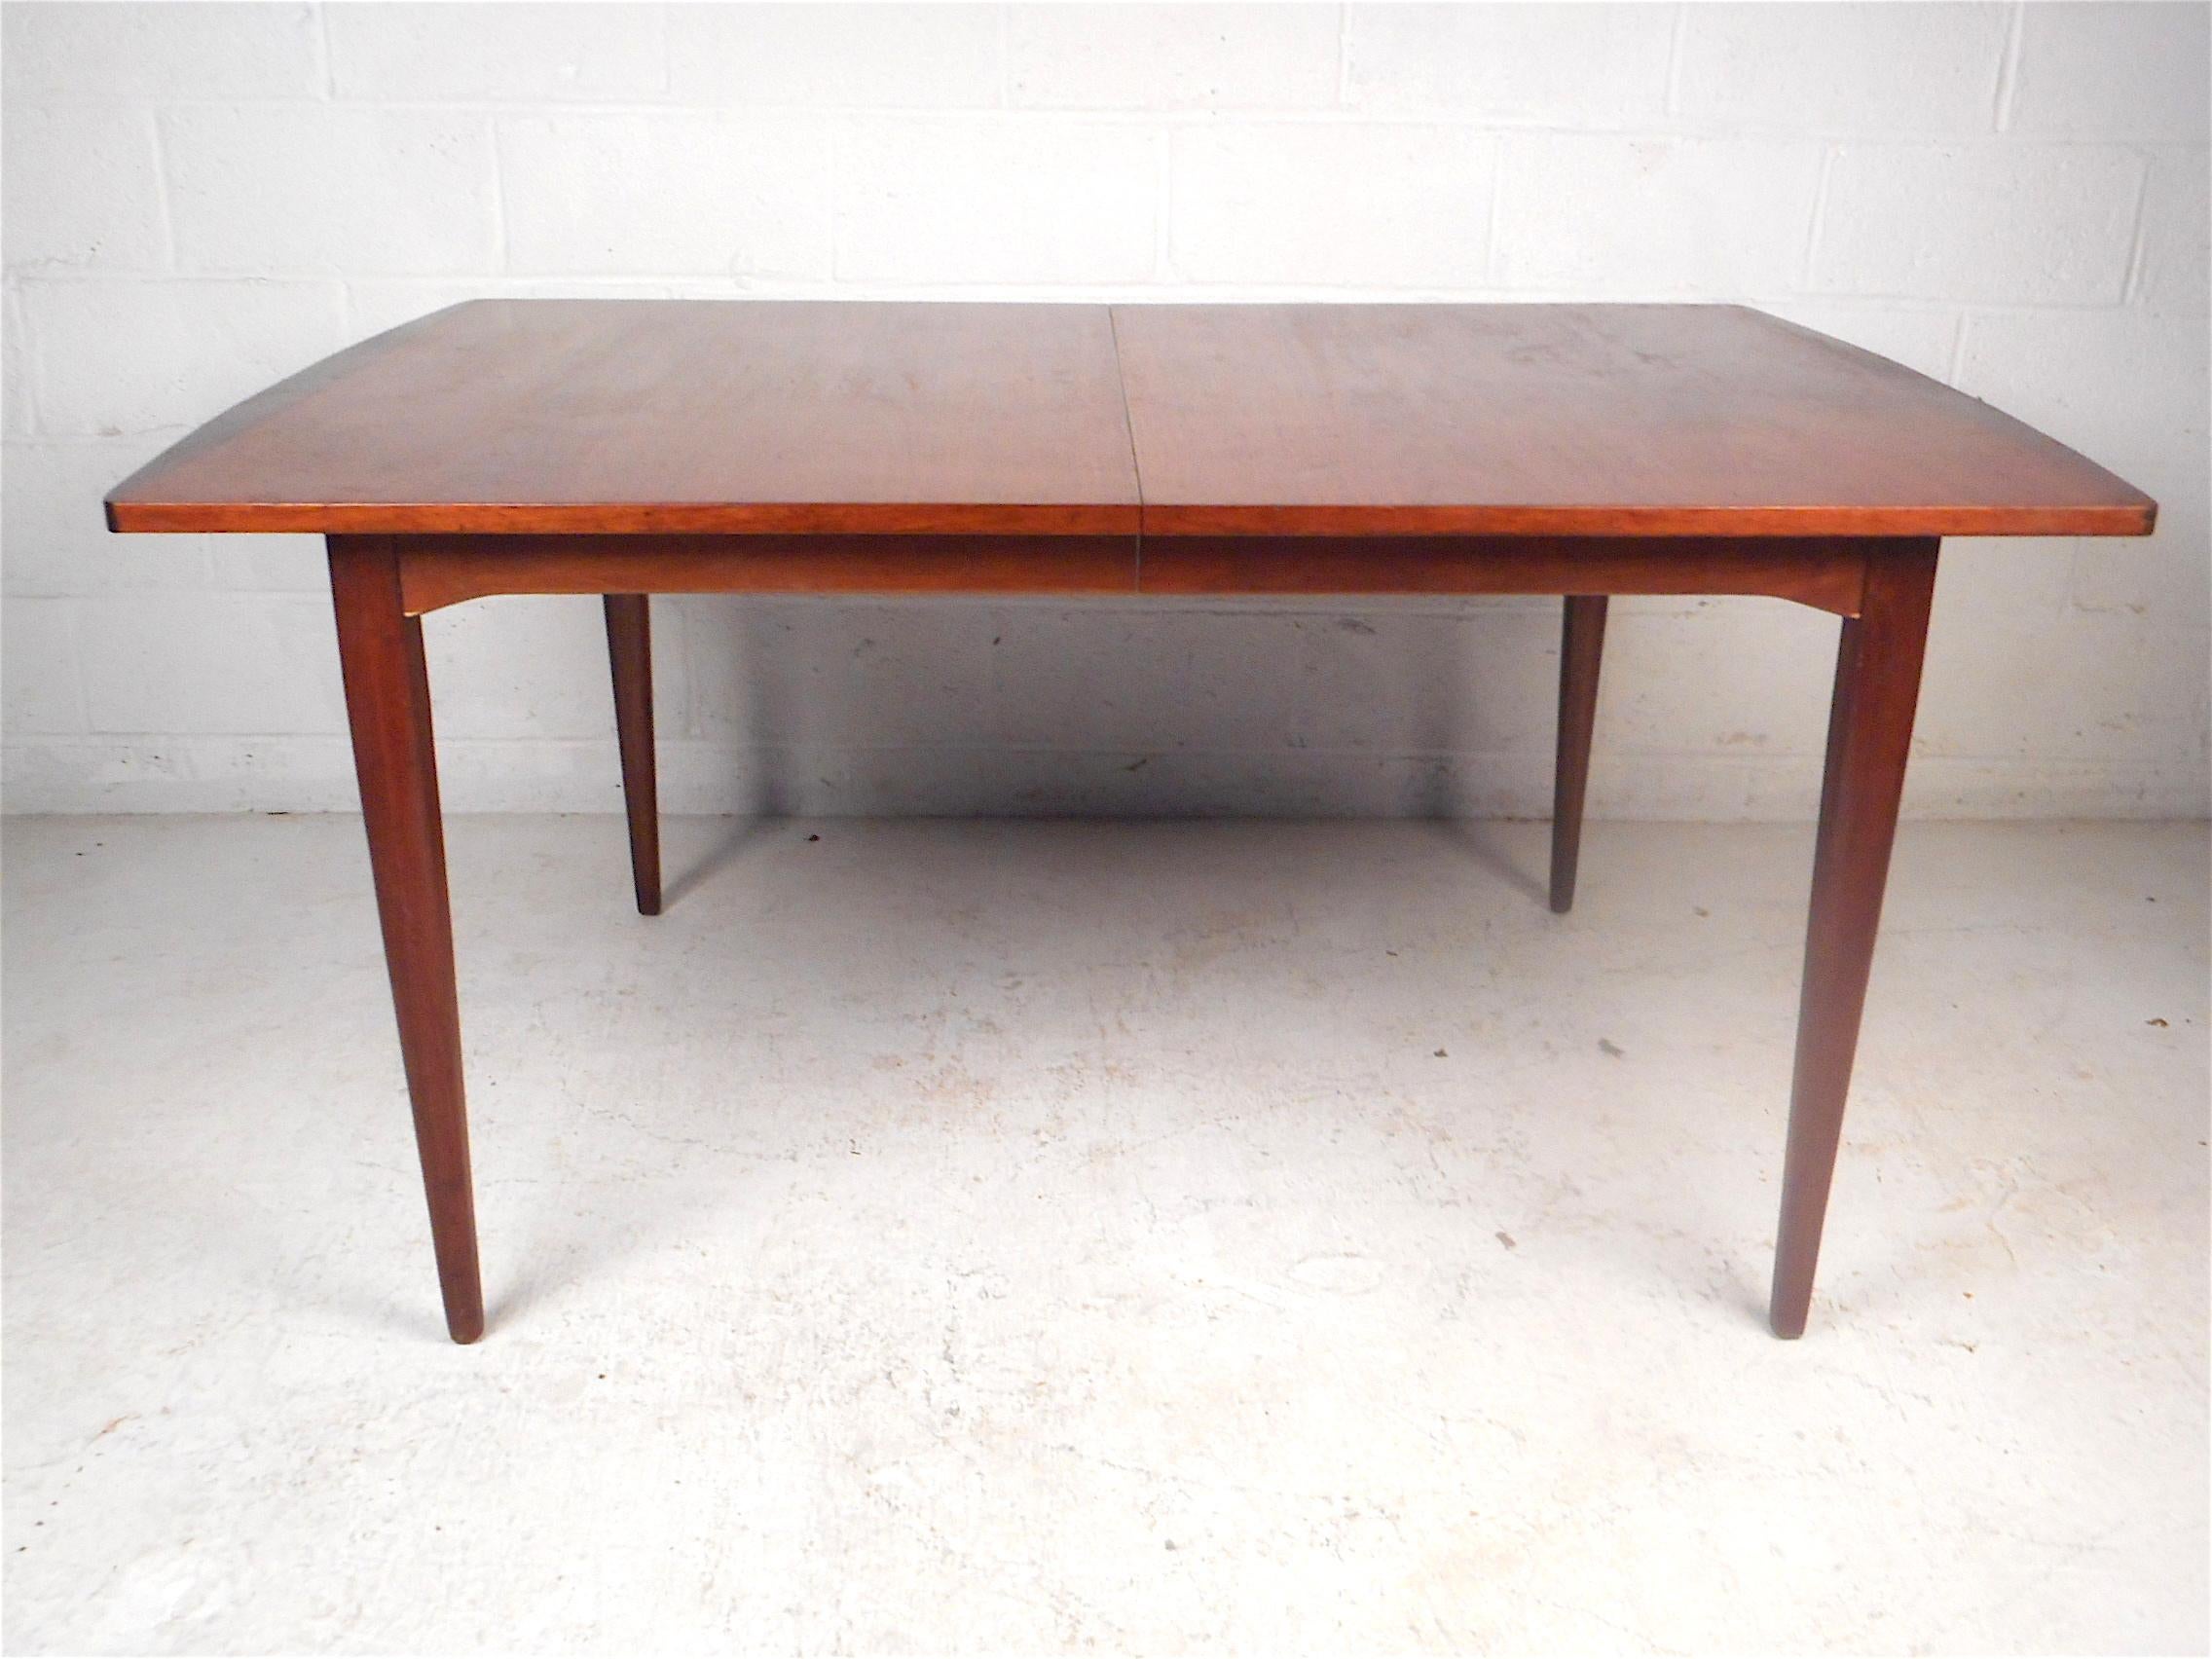 Stylish midcentury dining table made by Drexel. Sturdily made, rich walnut wood grain throughout, sleek tapered legs. Table has two leaves which expand the table's surface to accommodate additional diners. This table is sure to make a great addition